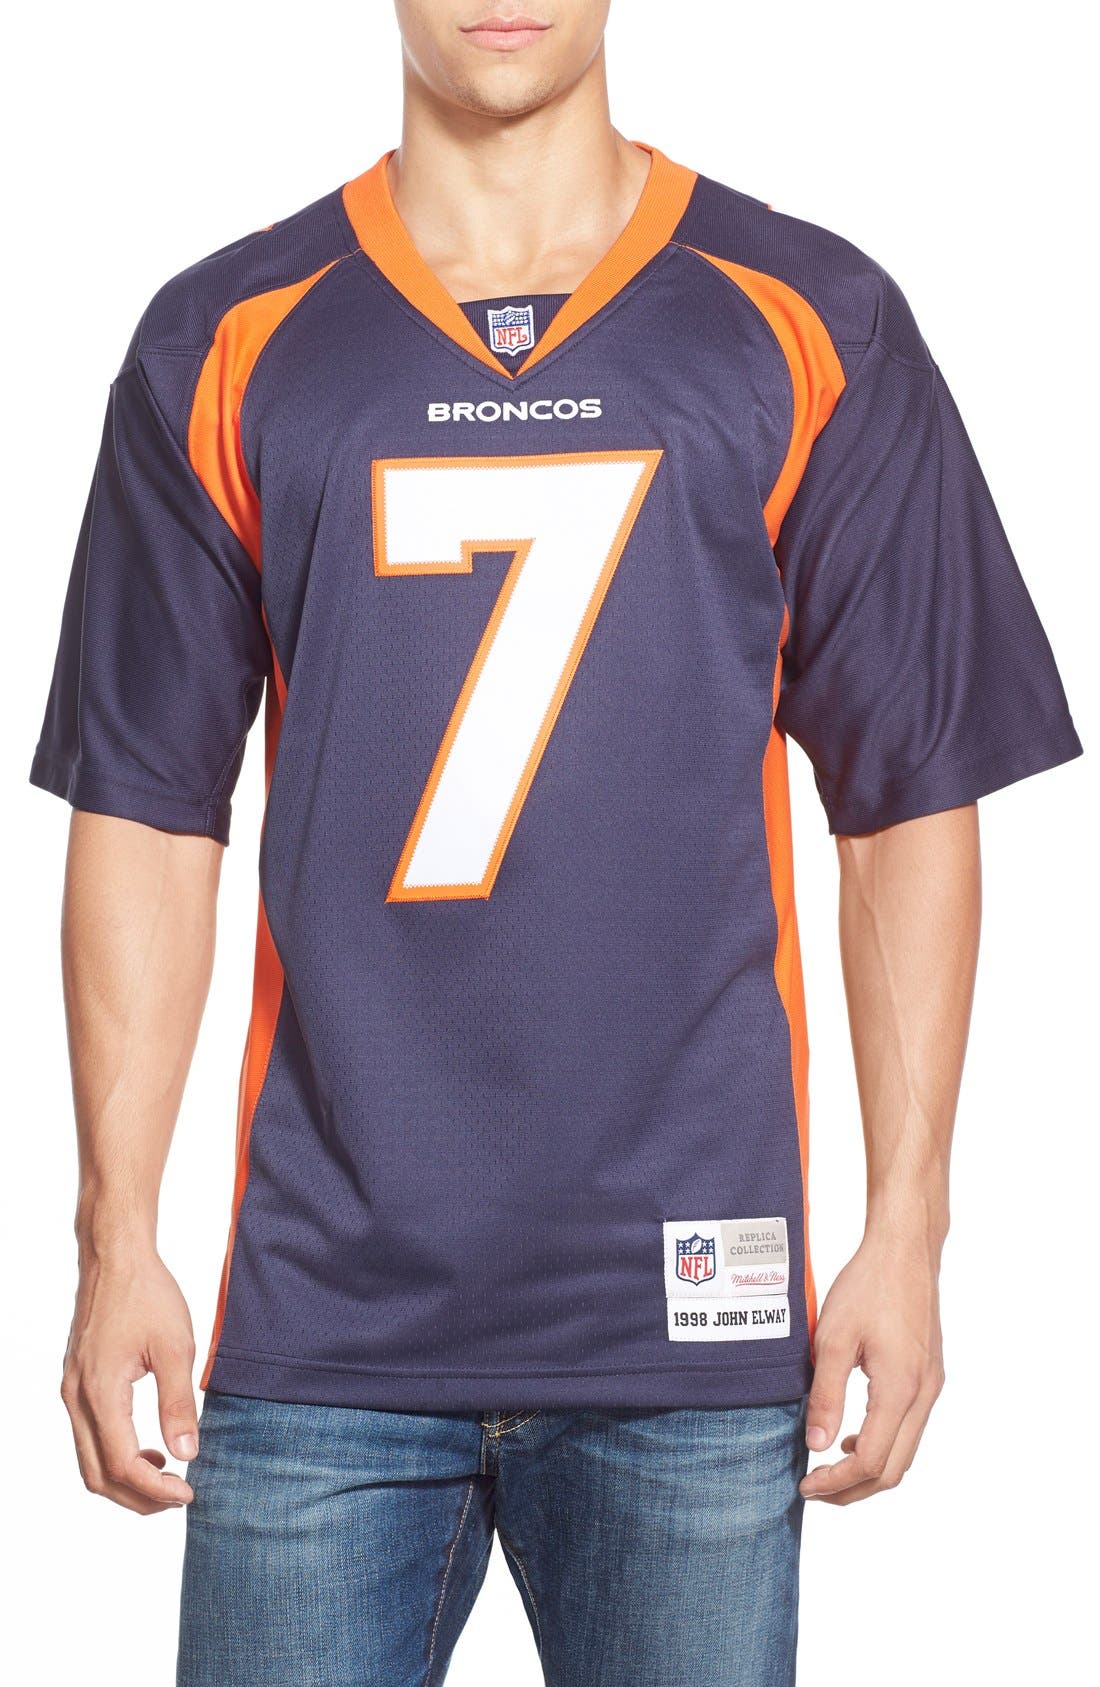 mitchell and ness john elway jersey